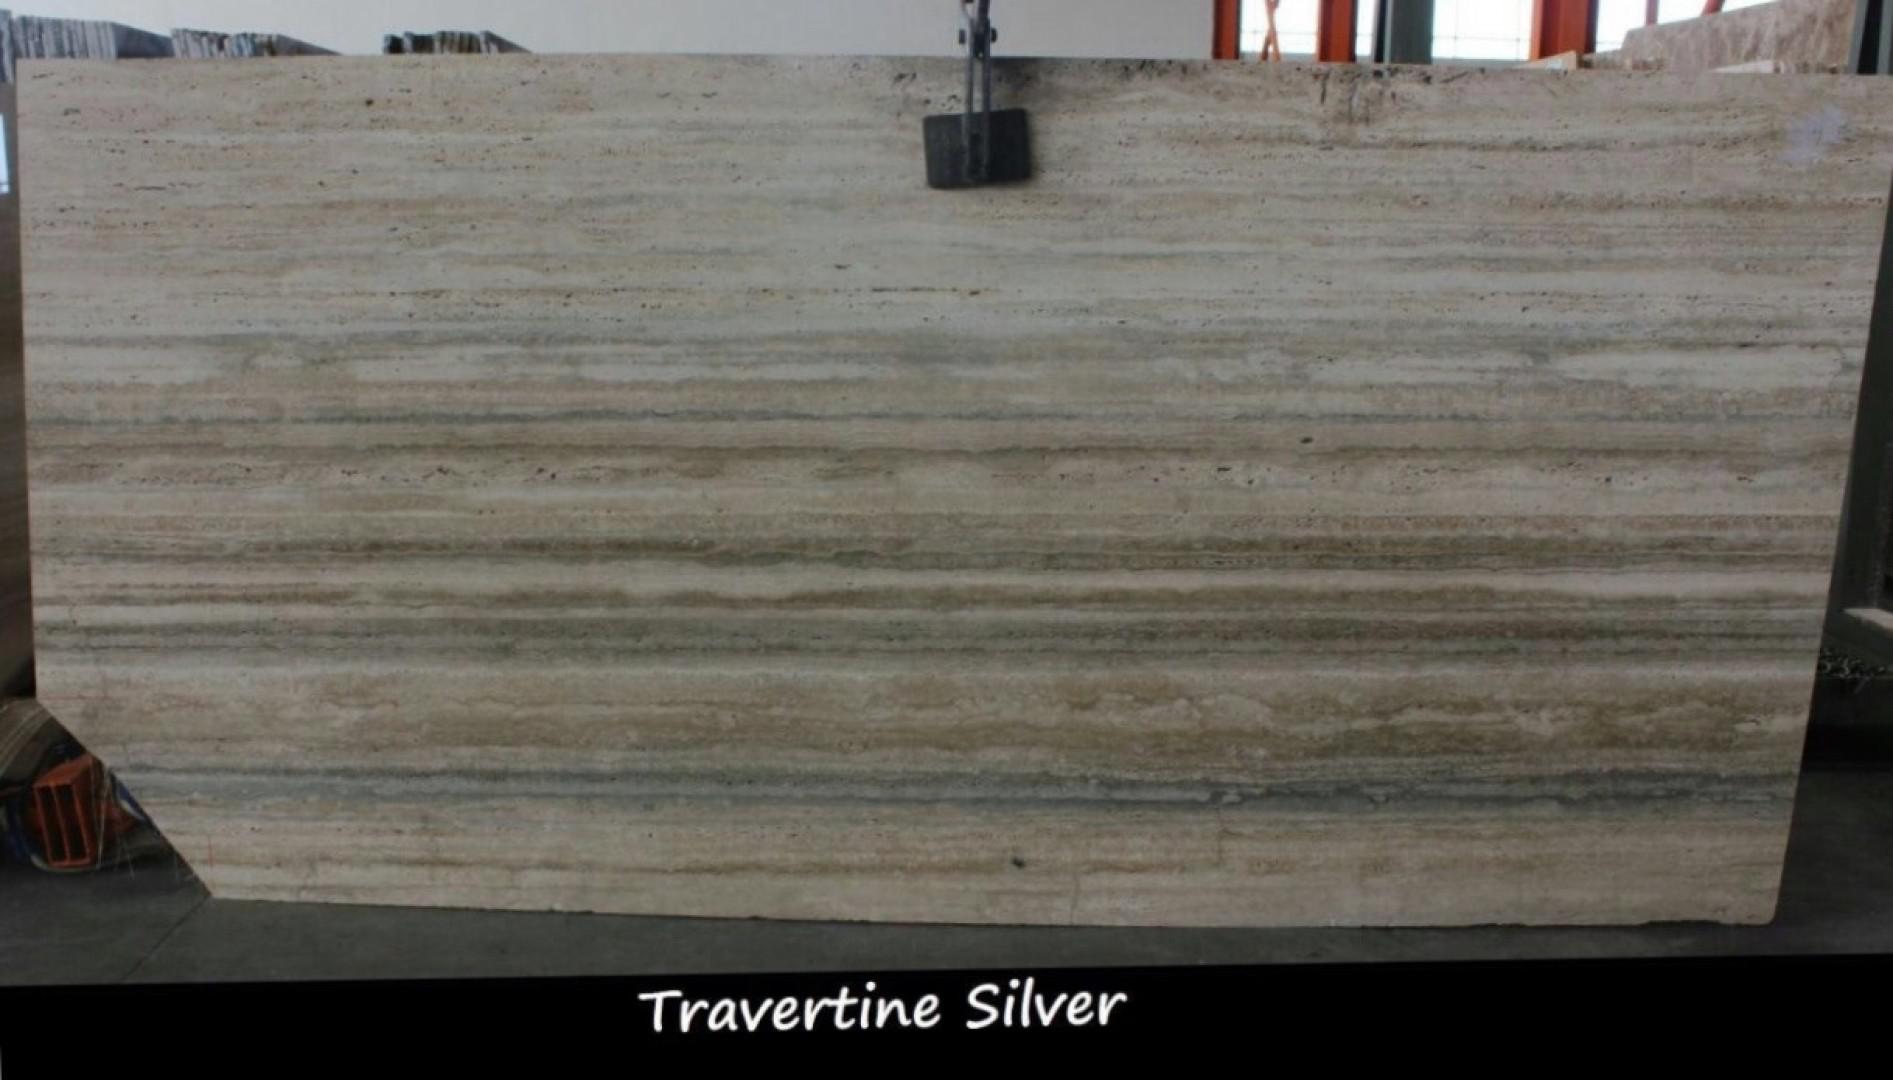 Travertine Silver from JSP